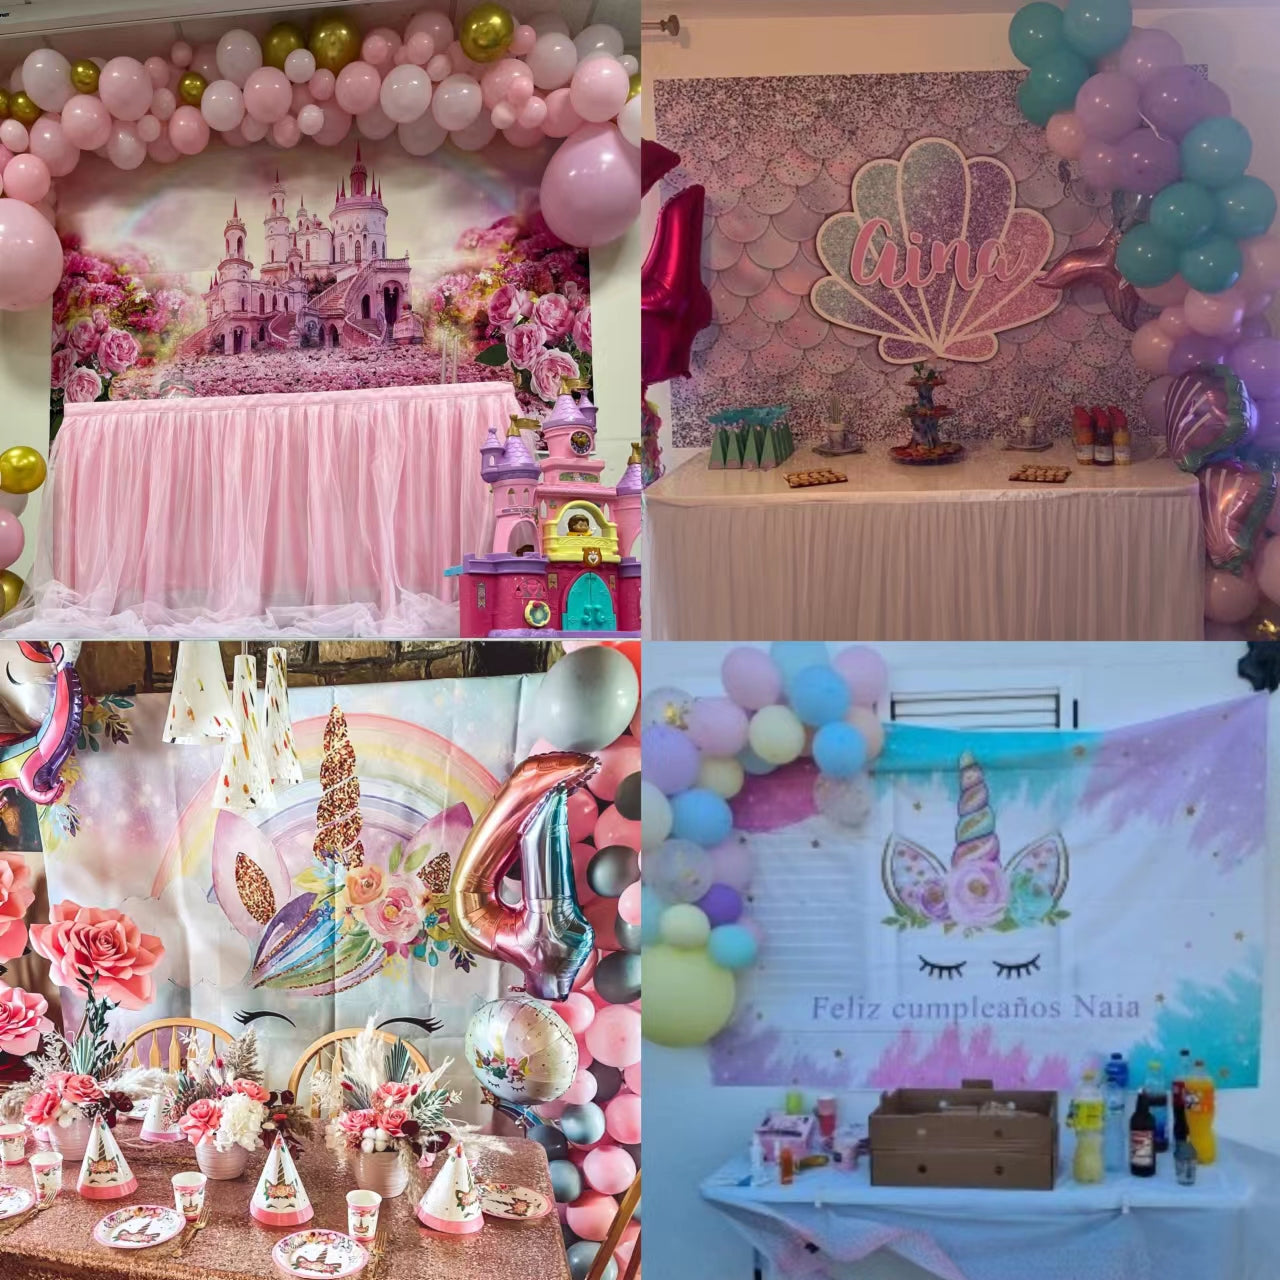 Young Wild And Three Happy Birthday Backdrop Banner